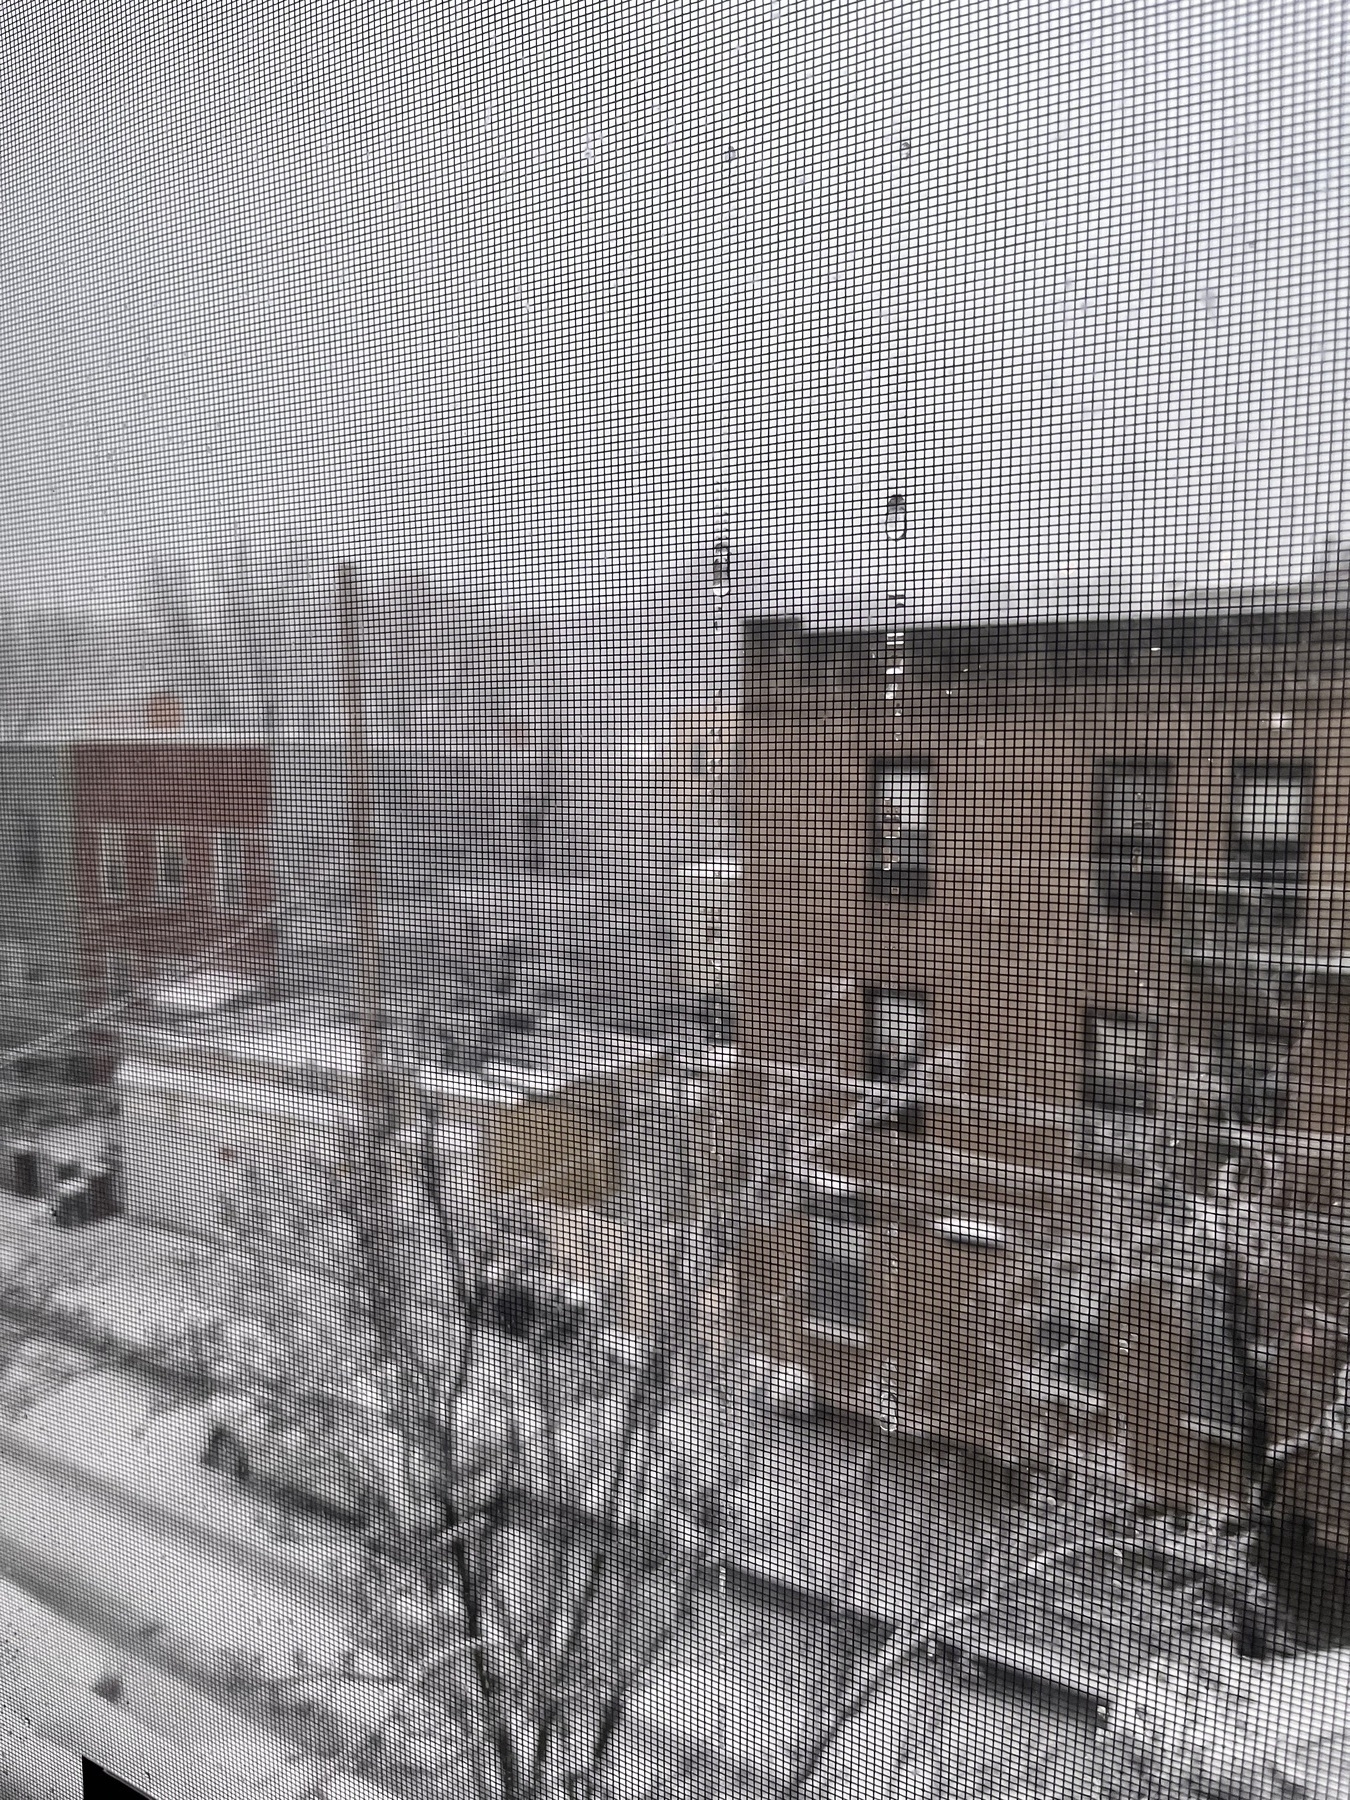 Accumulating snow as seen through my water streaked and screened window. Two and three story buildings are dusted with snow. The sky is white obscuring the bridge almost completely. 